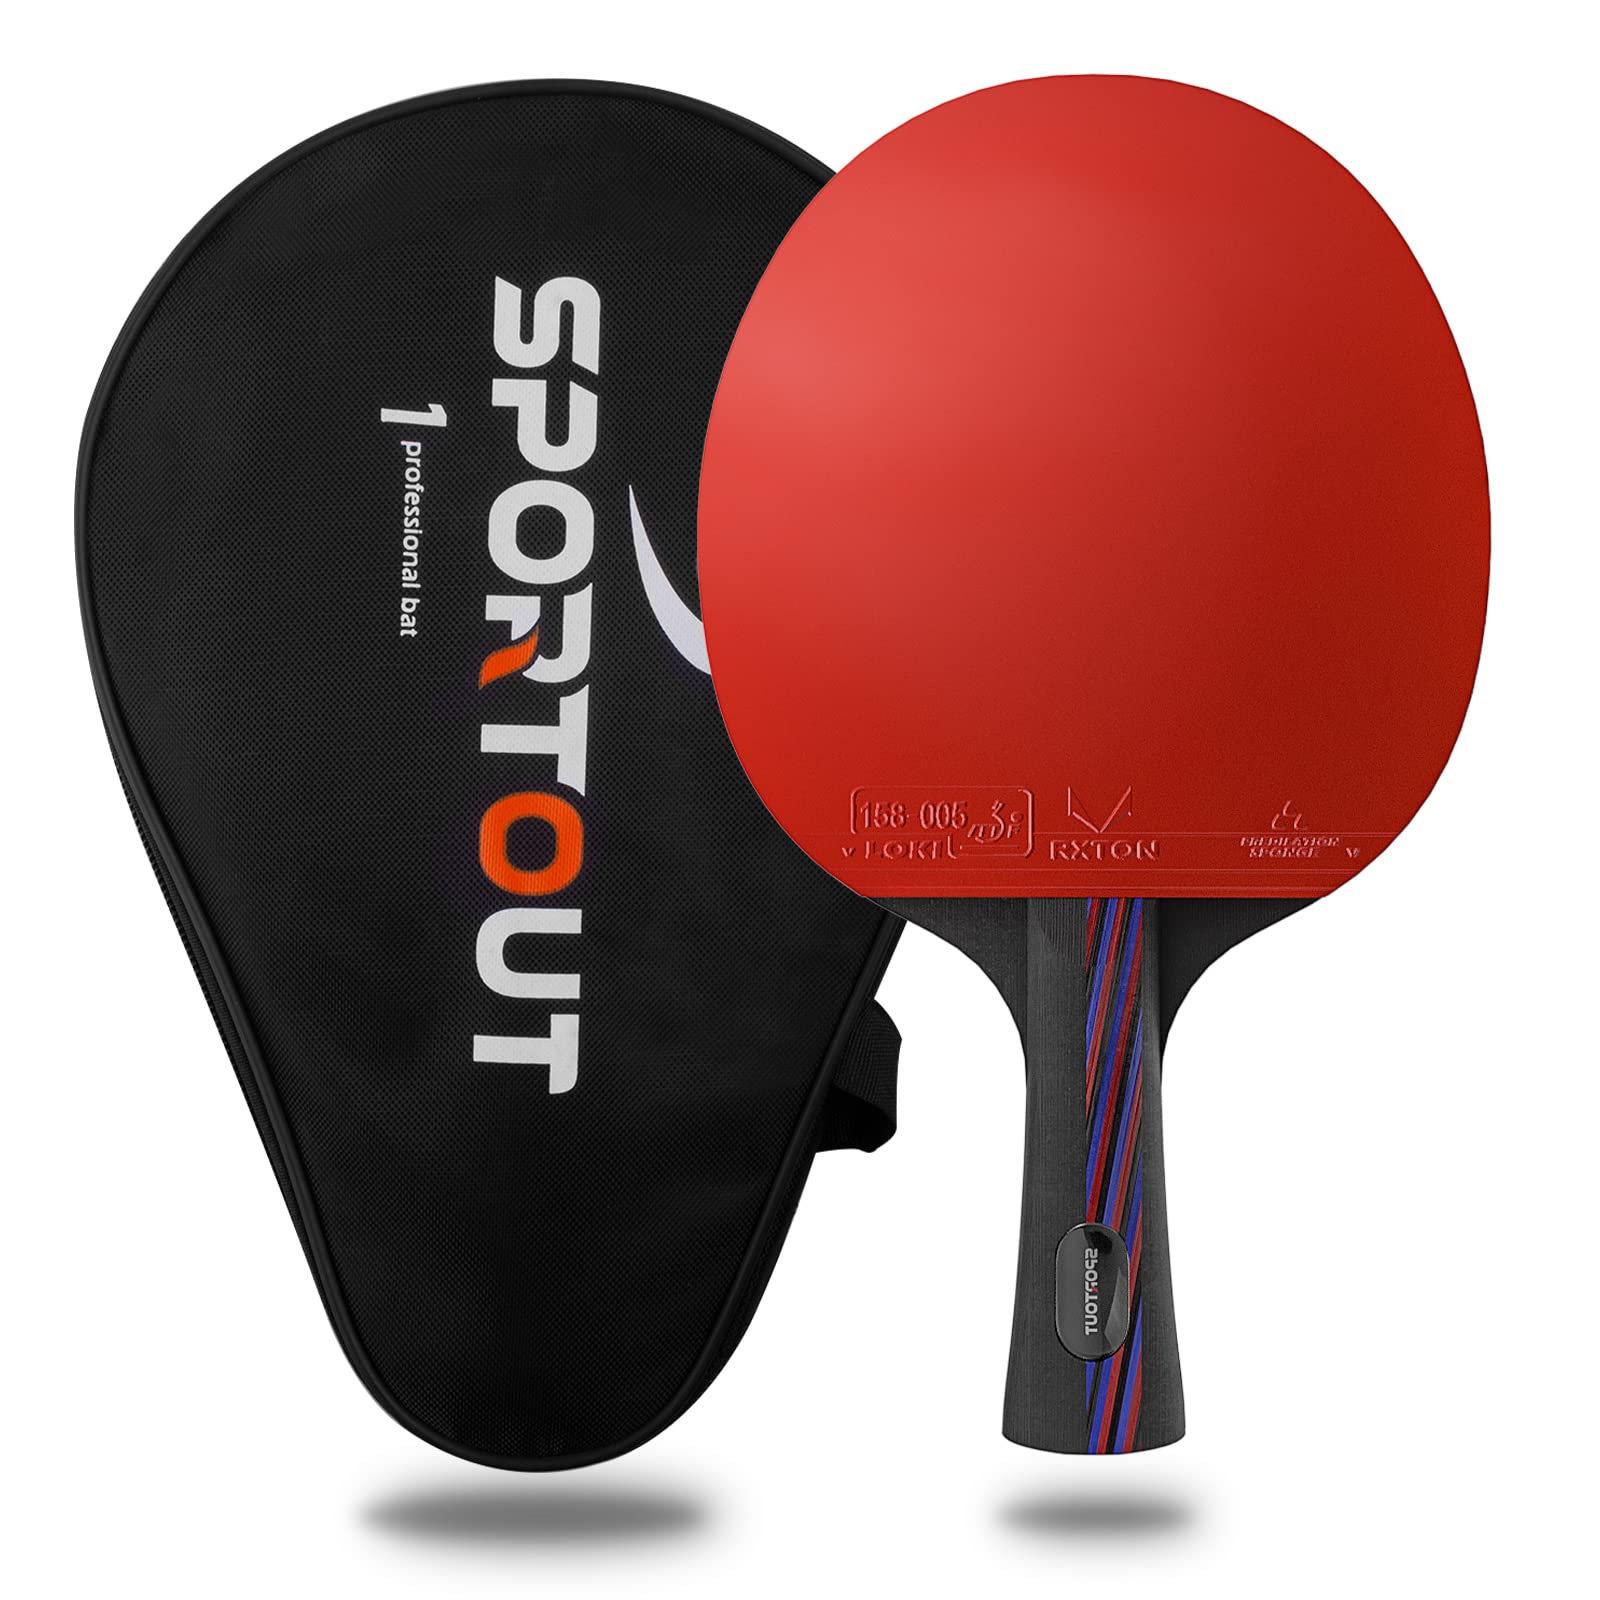 Sportout Ping Pong Paddle, Professional Table Tennis Racket with